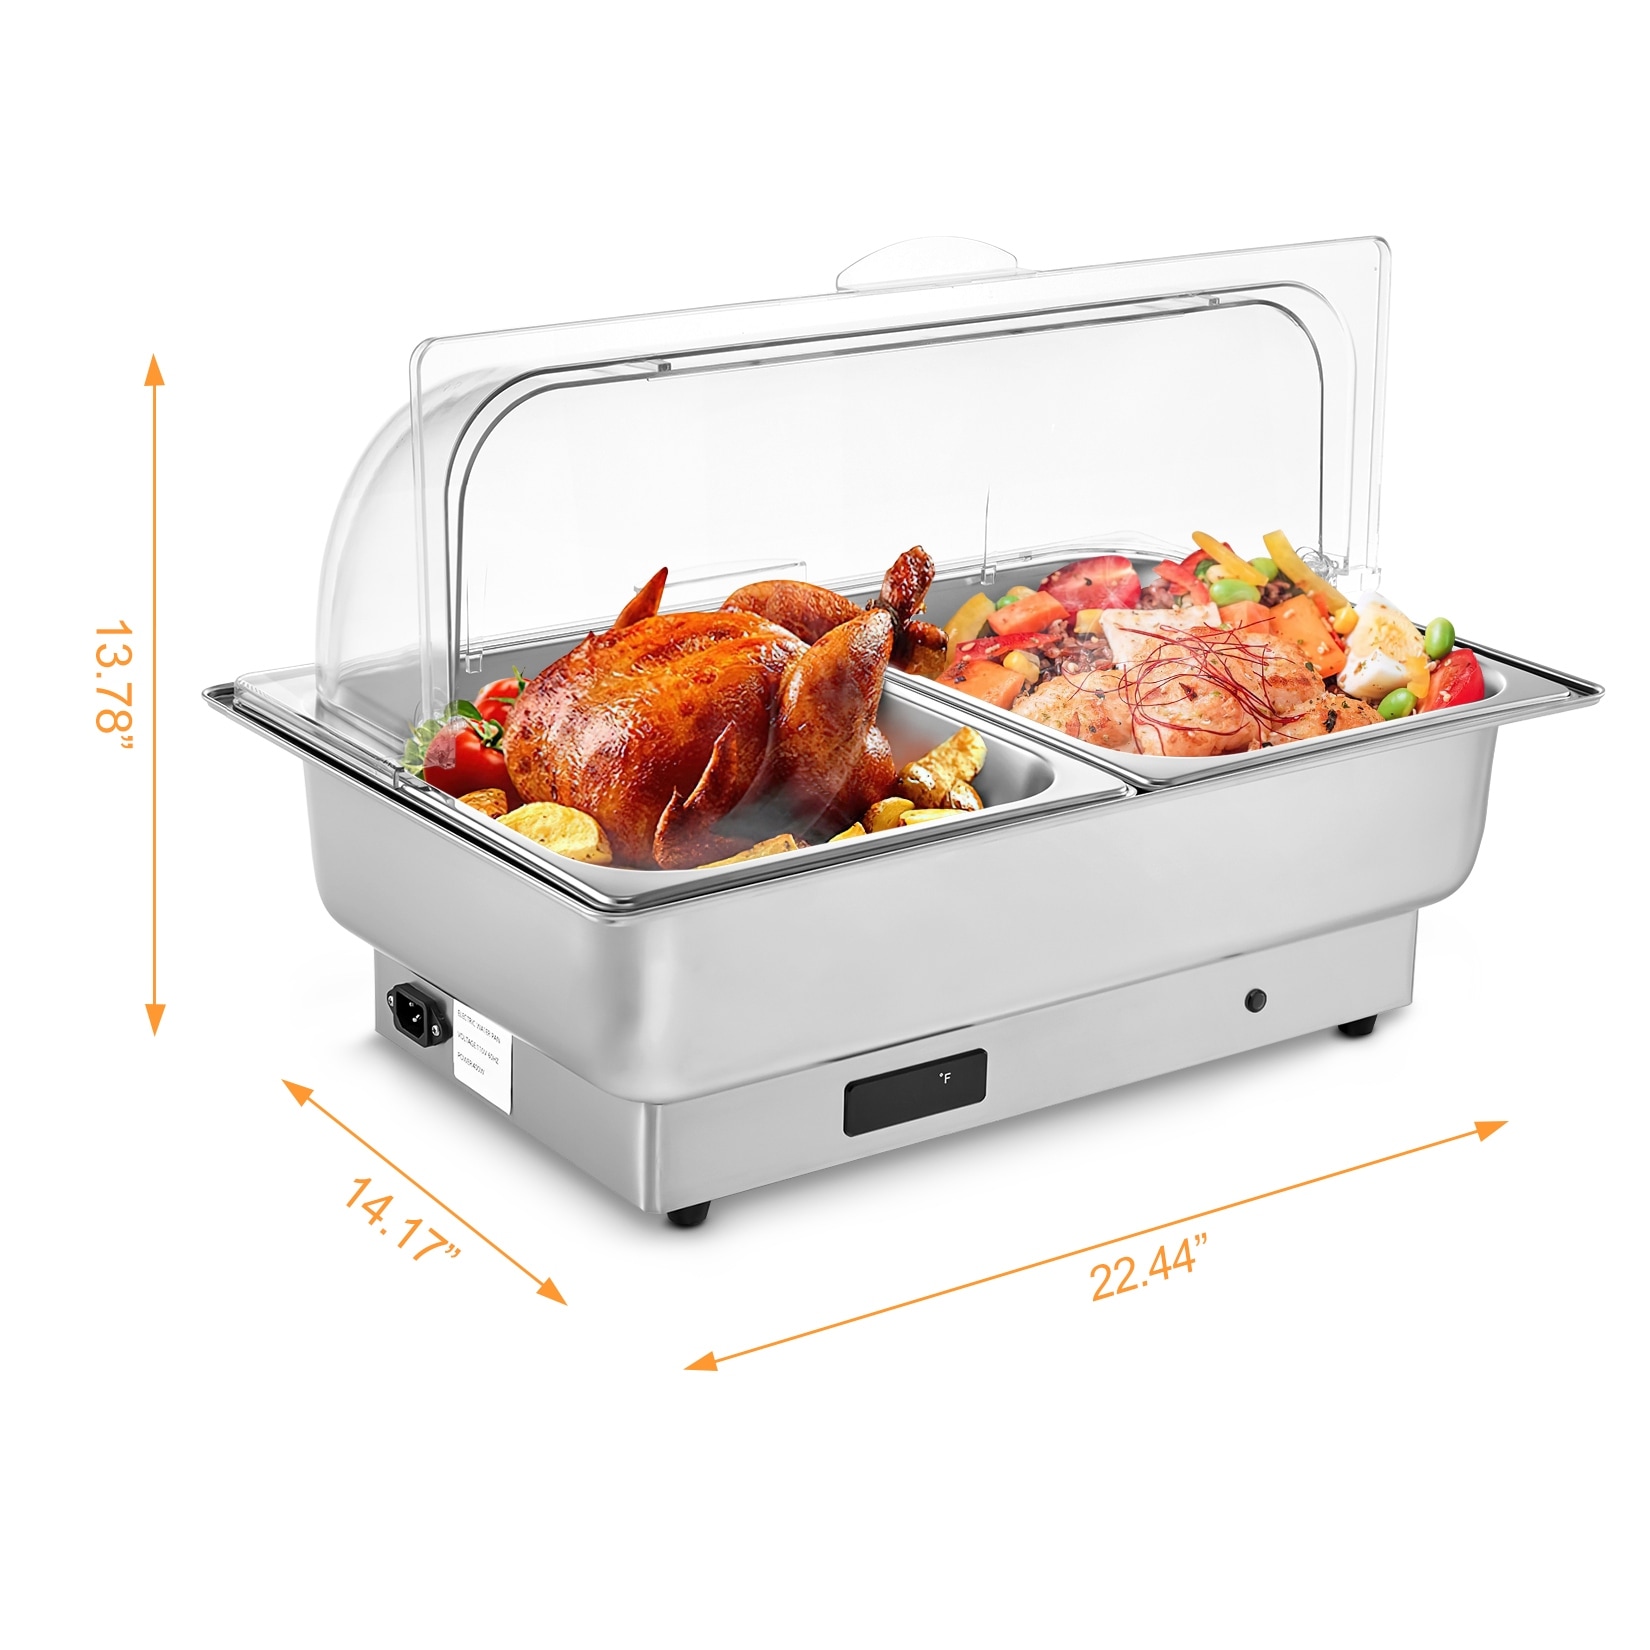 https://ak1.ostkcdn.com/images/products/is/images/direct/6bb7e3371ba2eea8e16ac7e662b6ed368d60a9d7/9-QT-Electric-Chafing-Dish-Buffet-Set.jpg